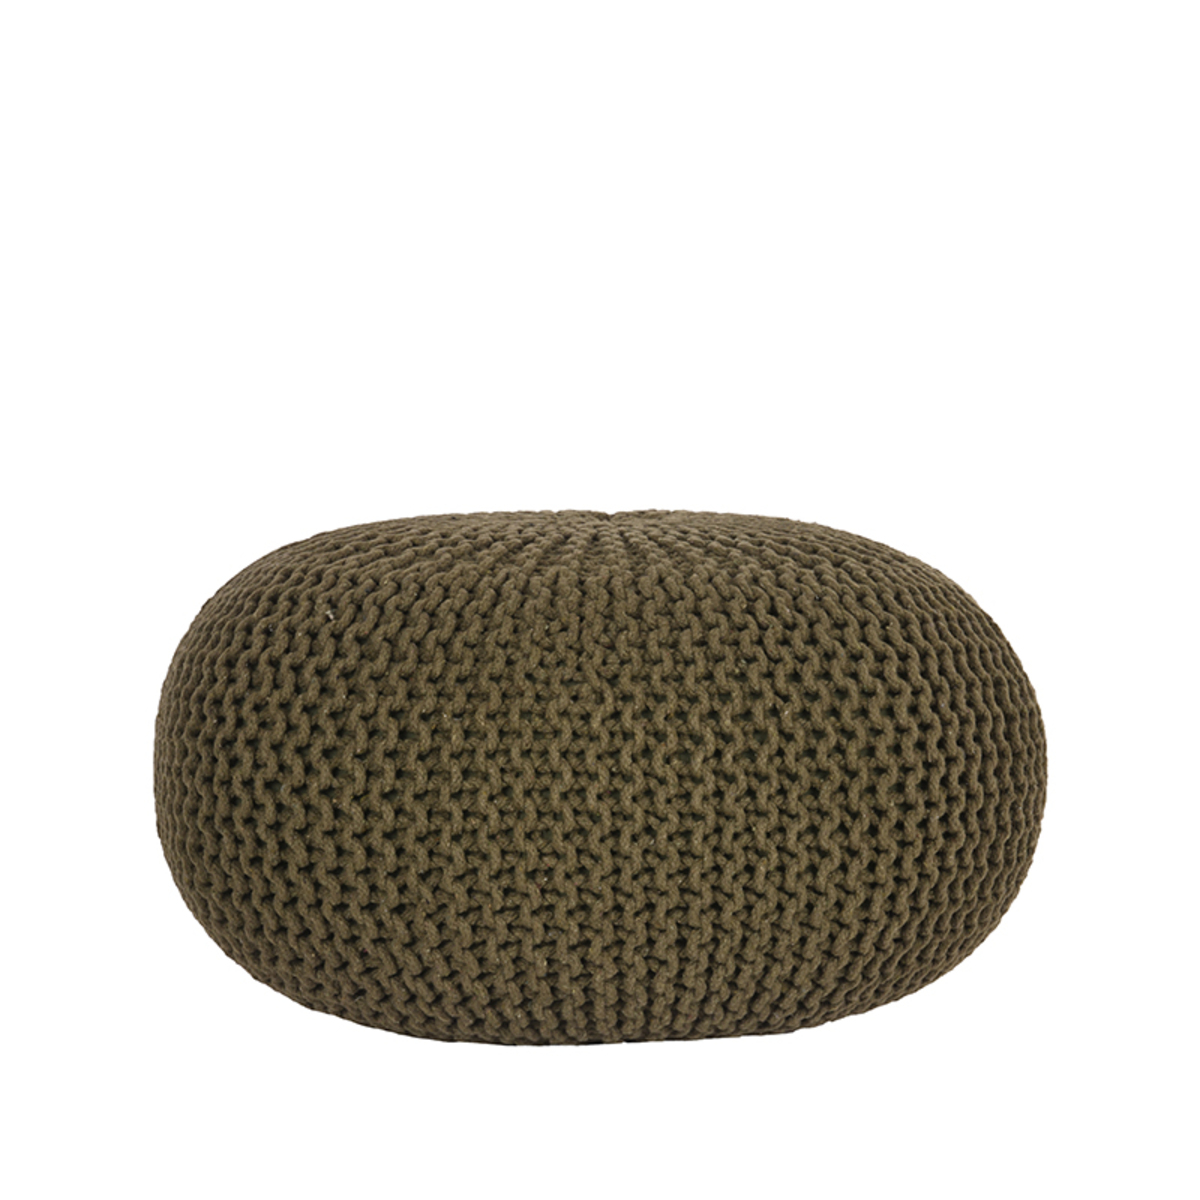  Poef Knitted - Army green - Katoen - L afbeelding 1